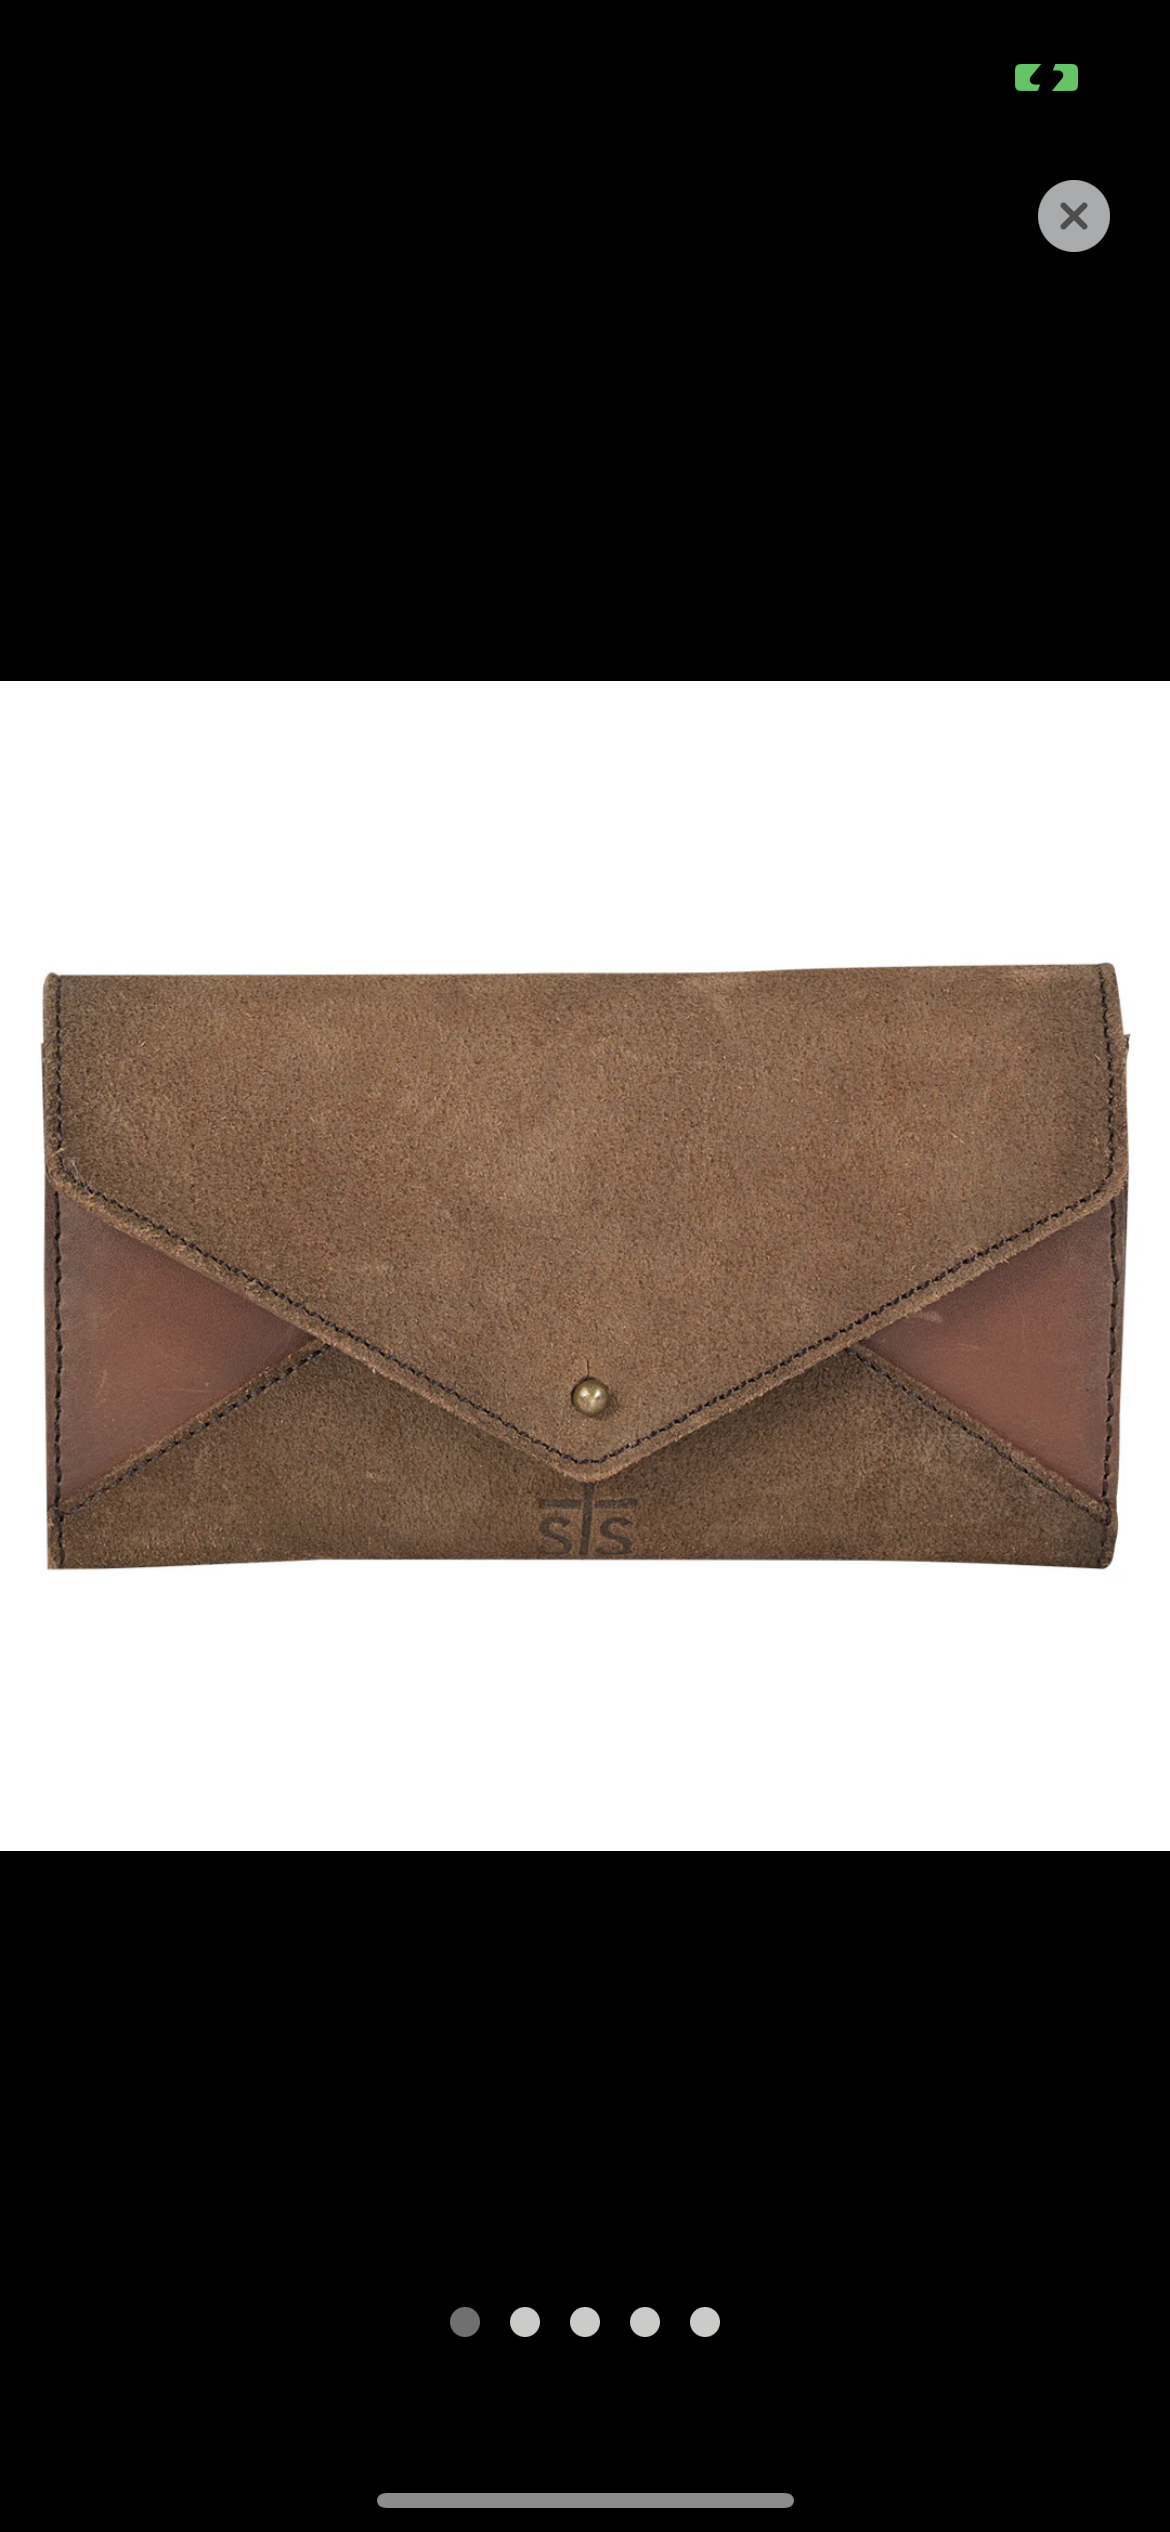 Class Act Envelope Wallet by STS Ranchwear